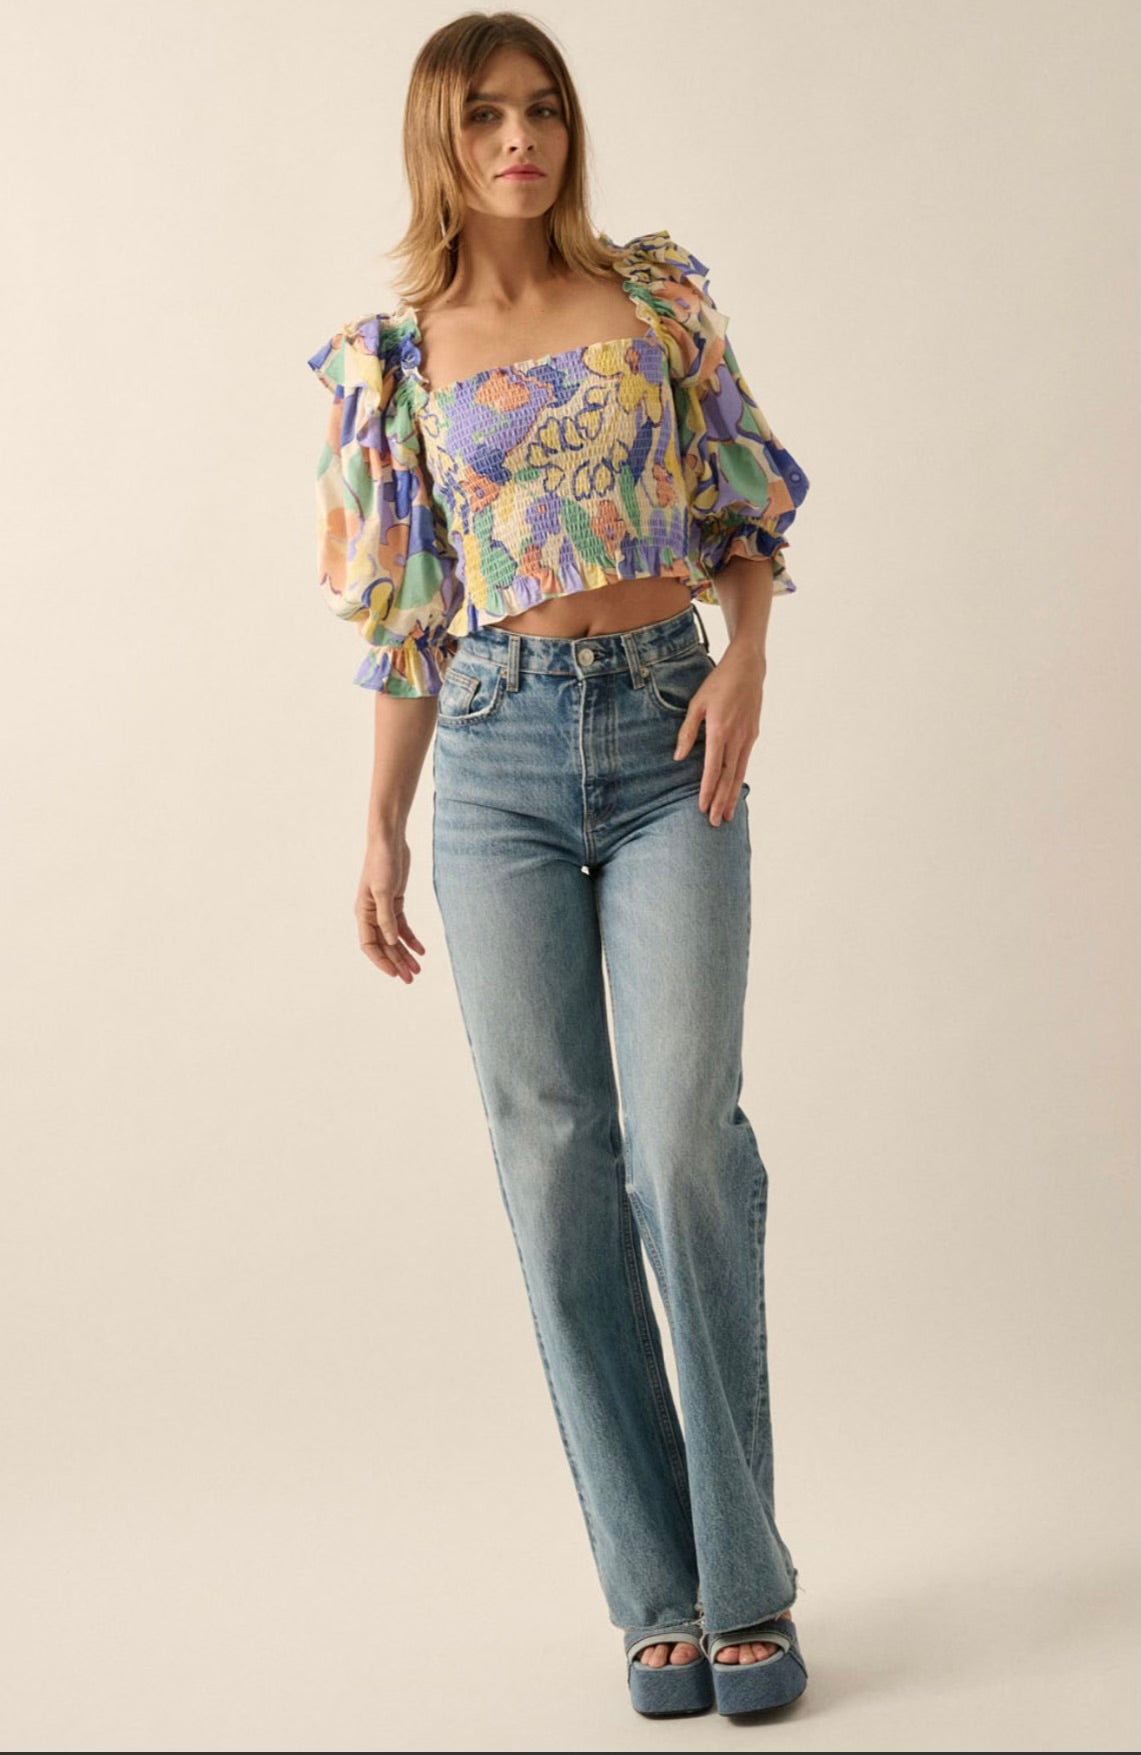 A Summer Night Out Top